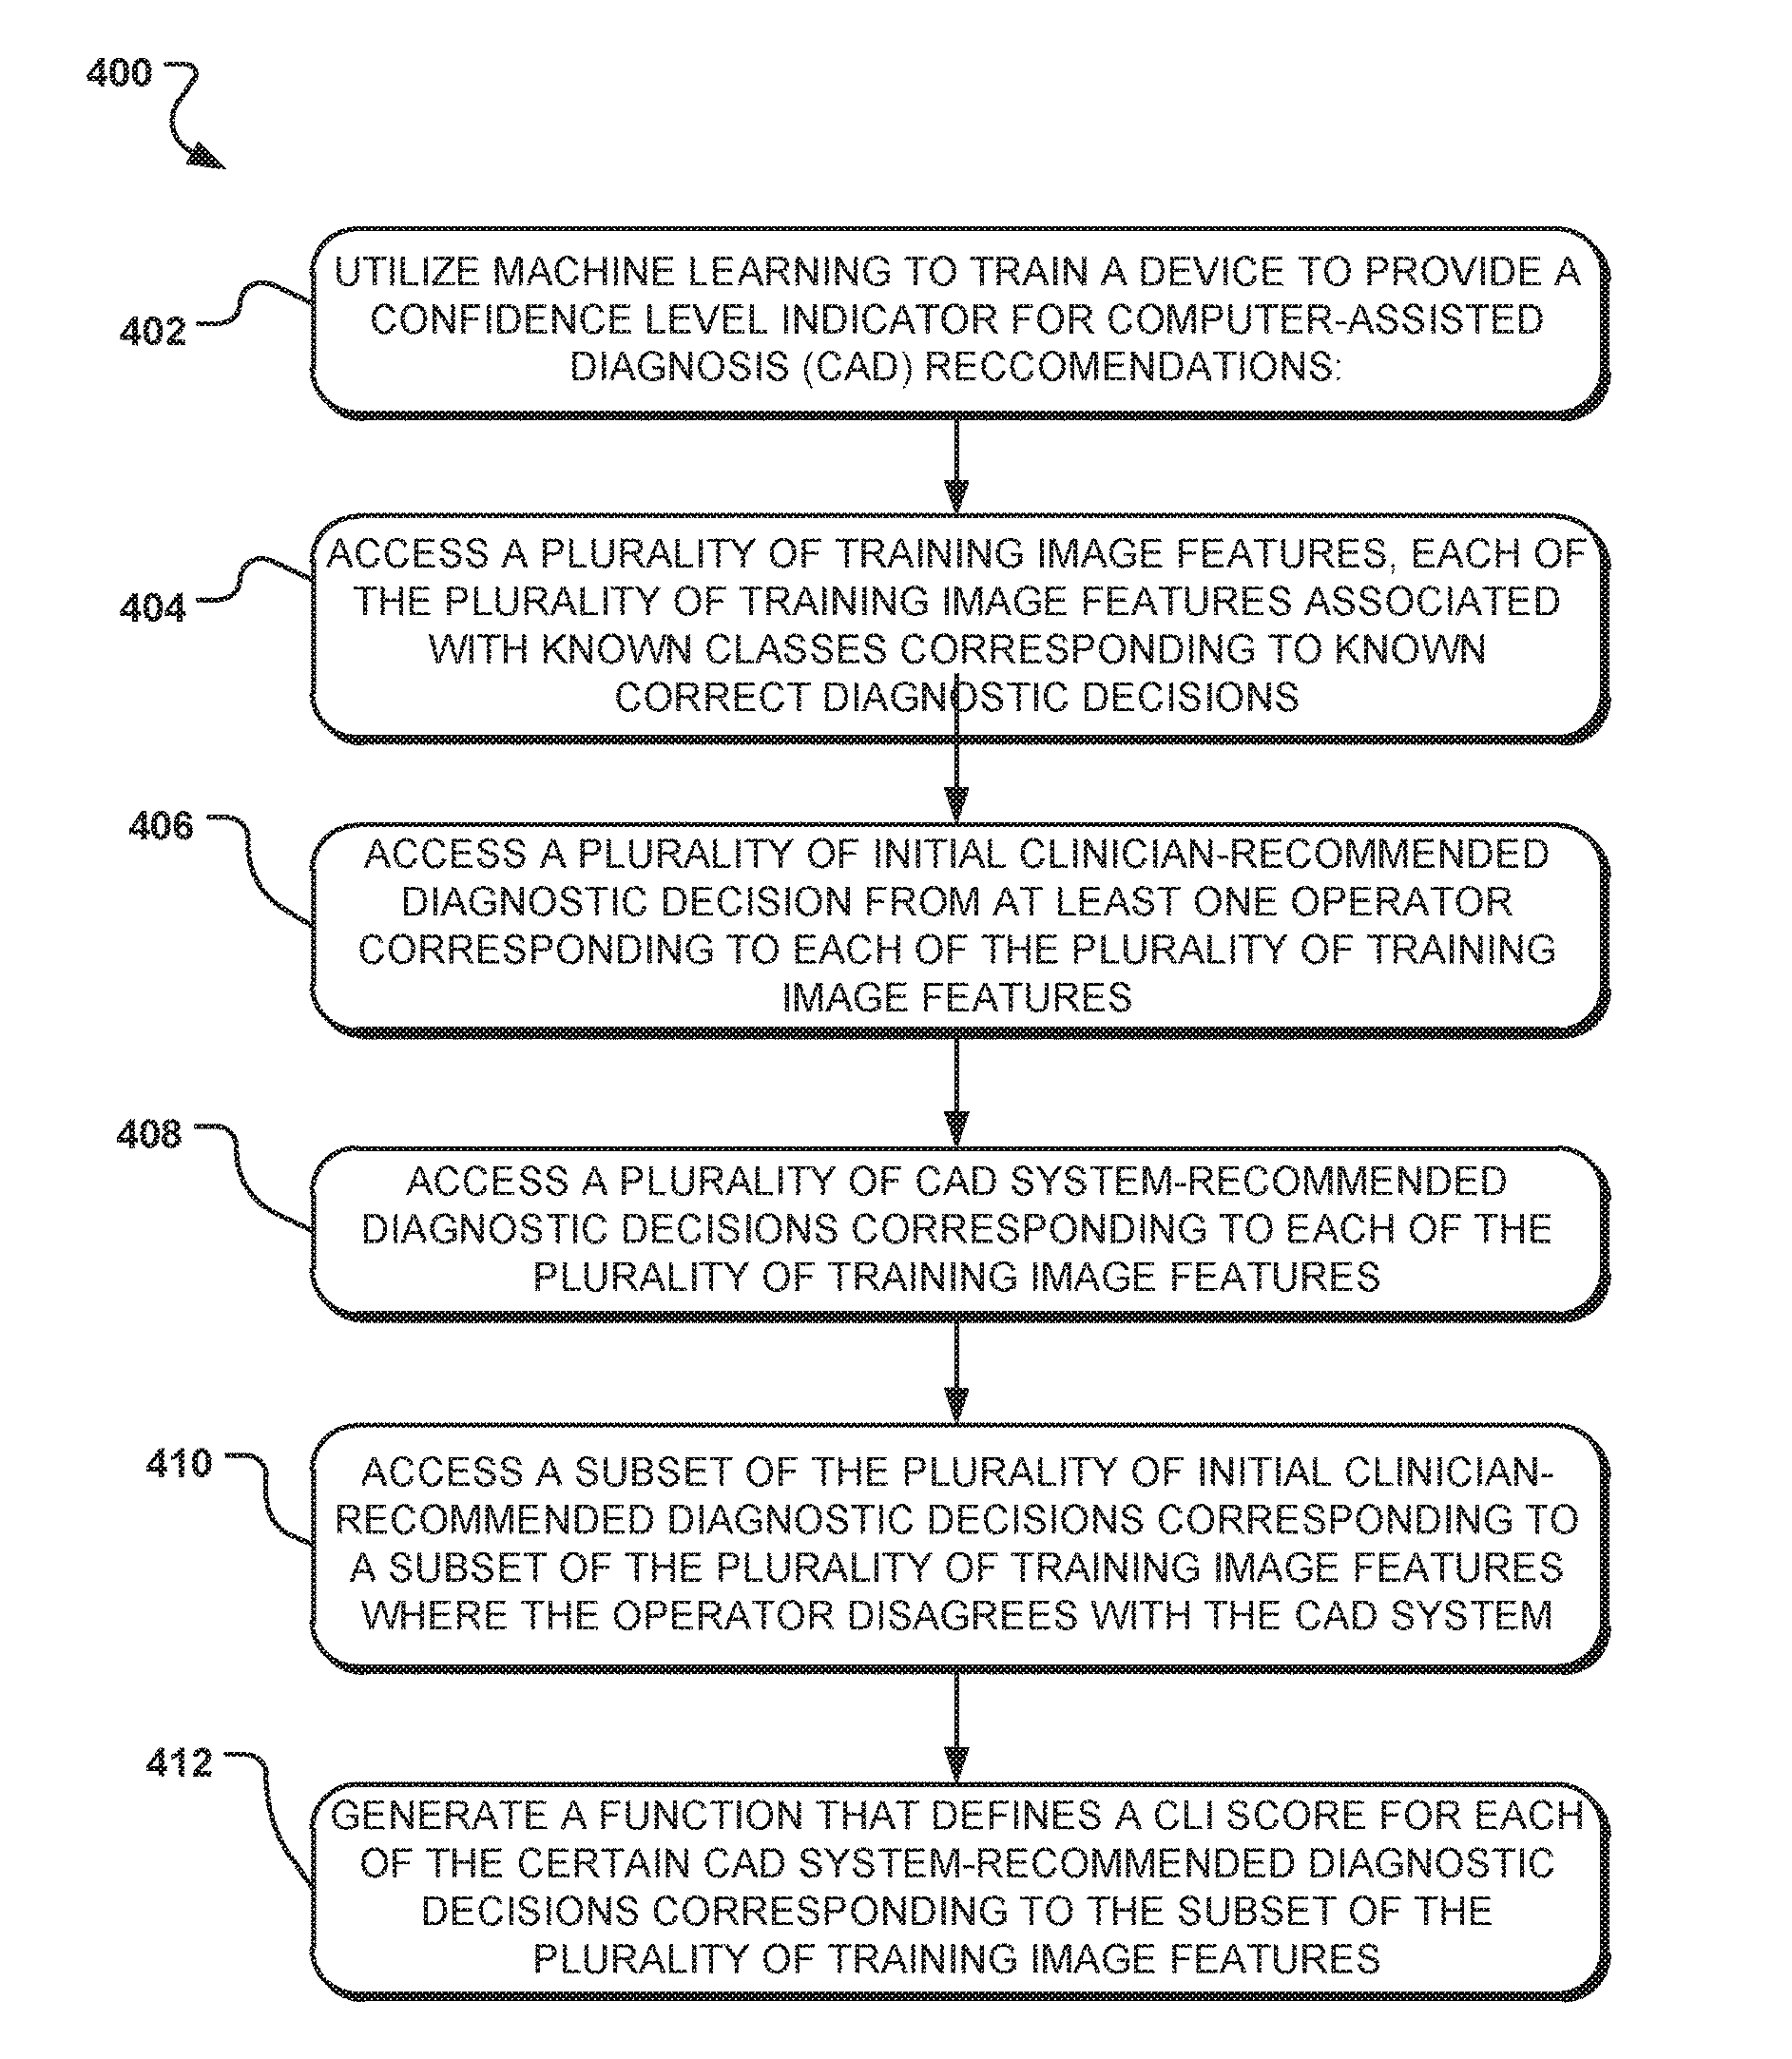 Method and means of CAD system personalization to provide a confidence level indicator for CAD system recommendations